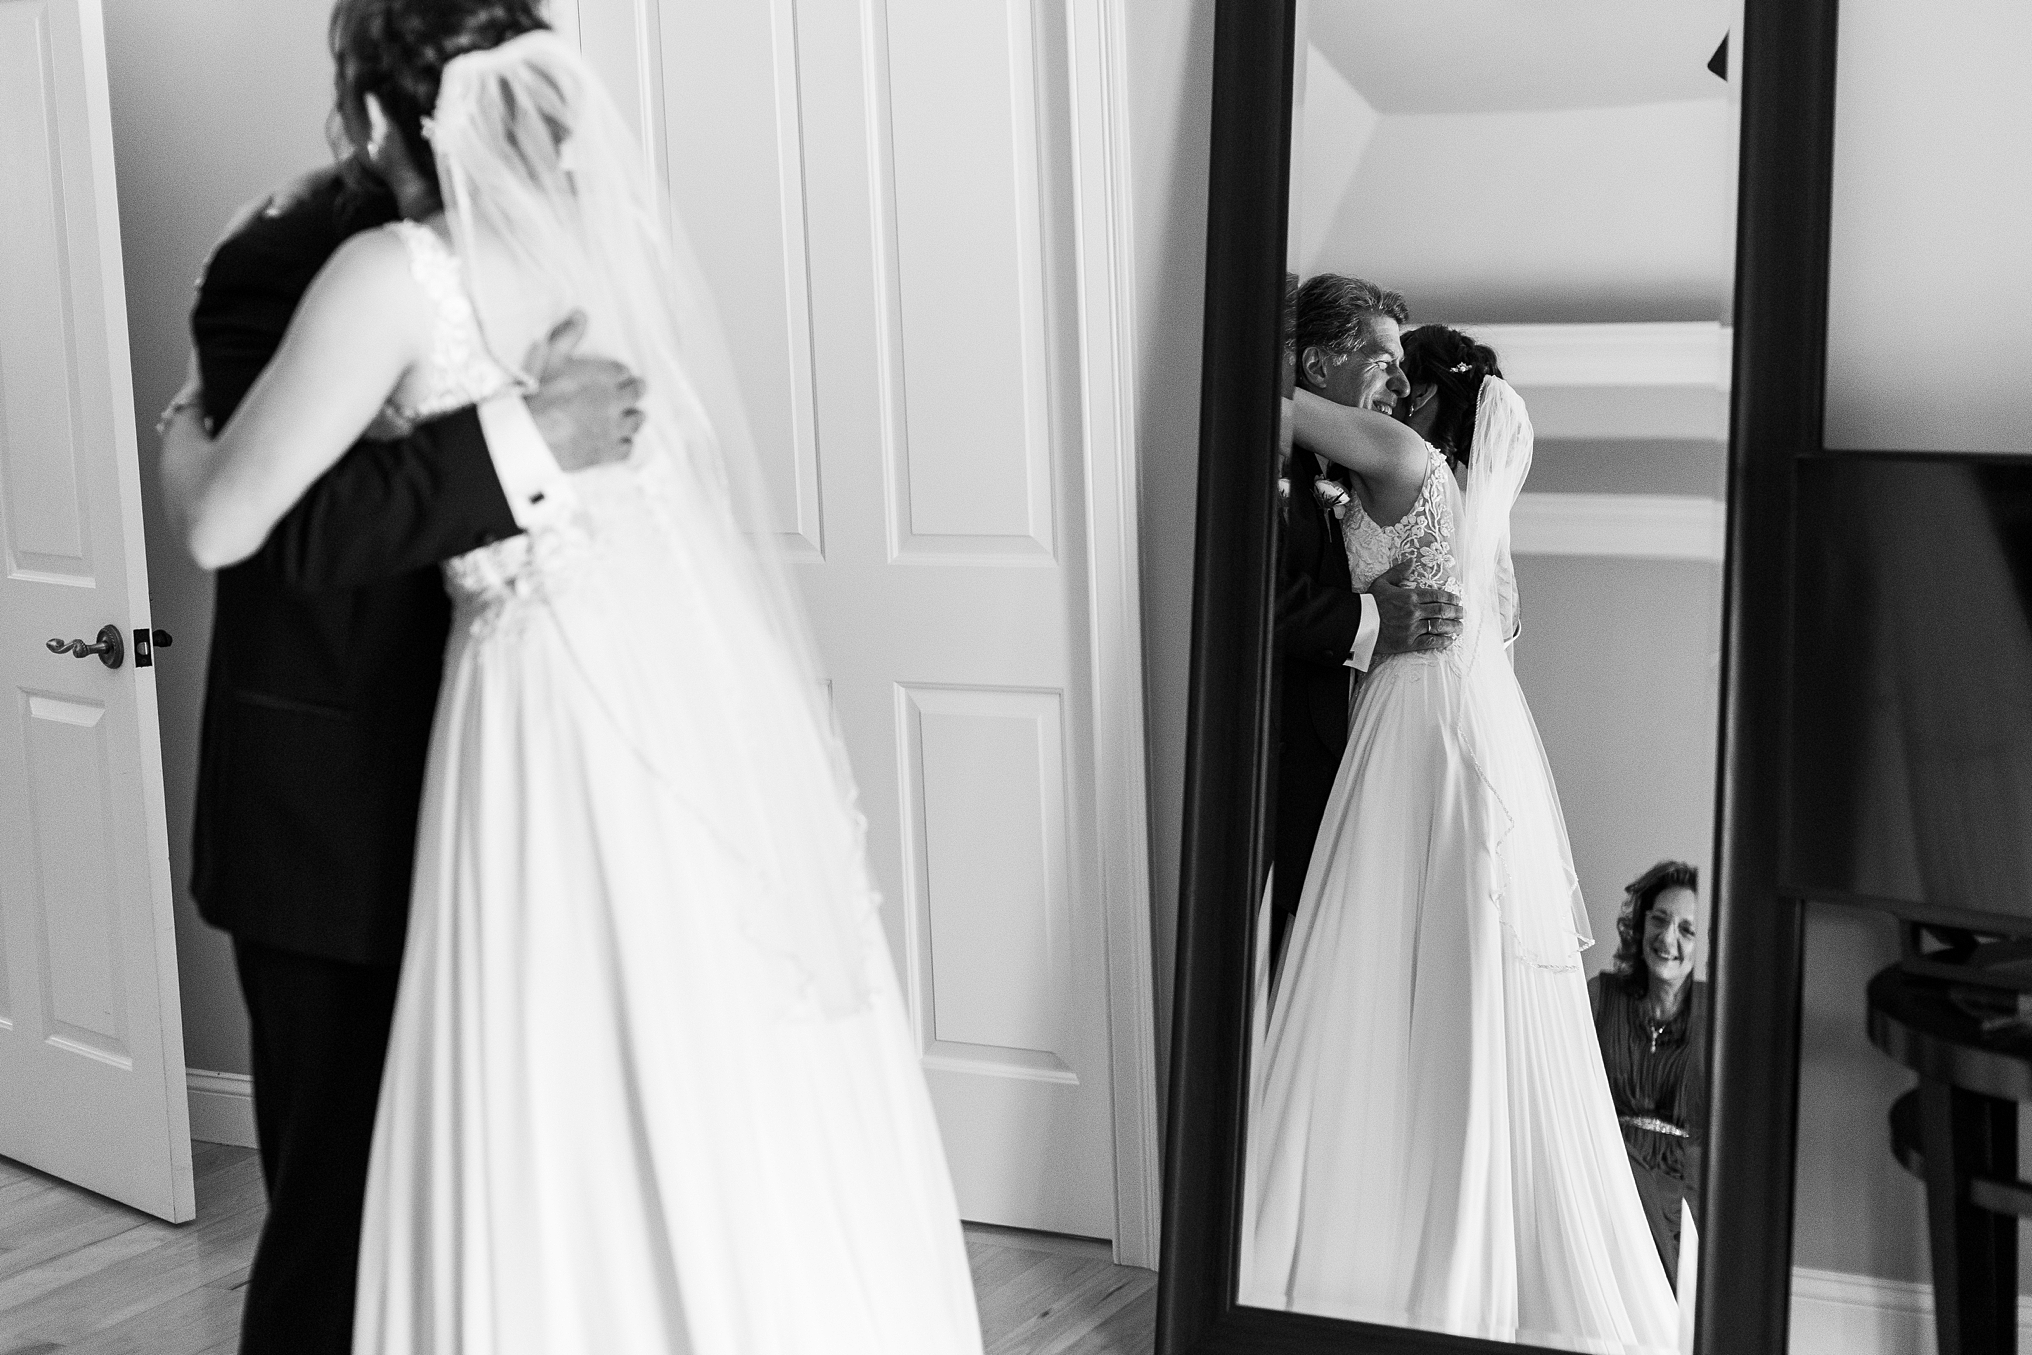 Dad sees his daughter for the first time on her wedding day, with mom looking on.